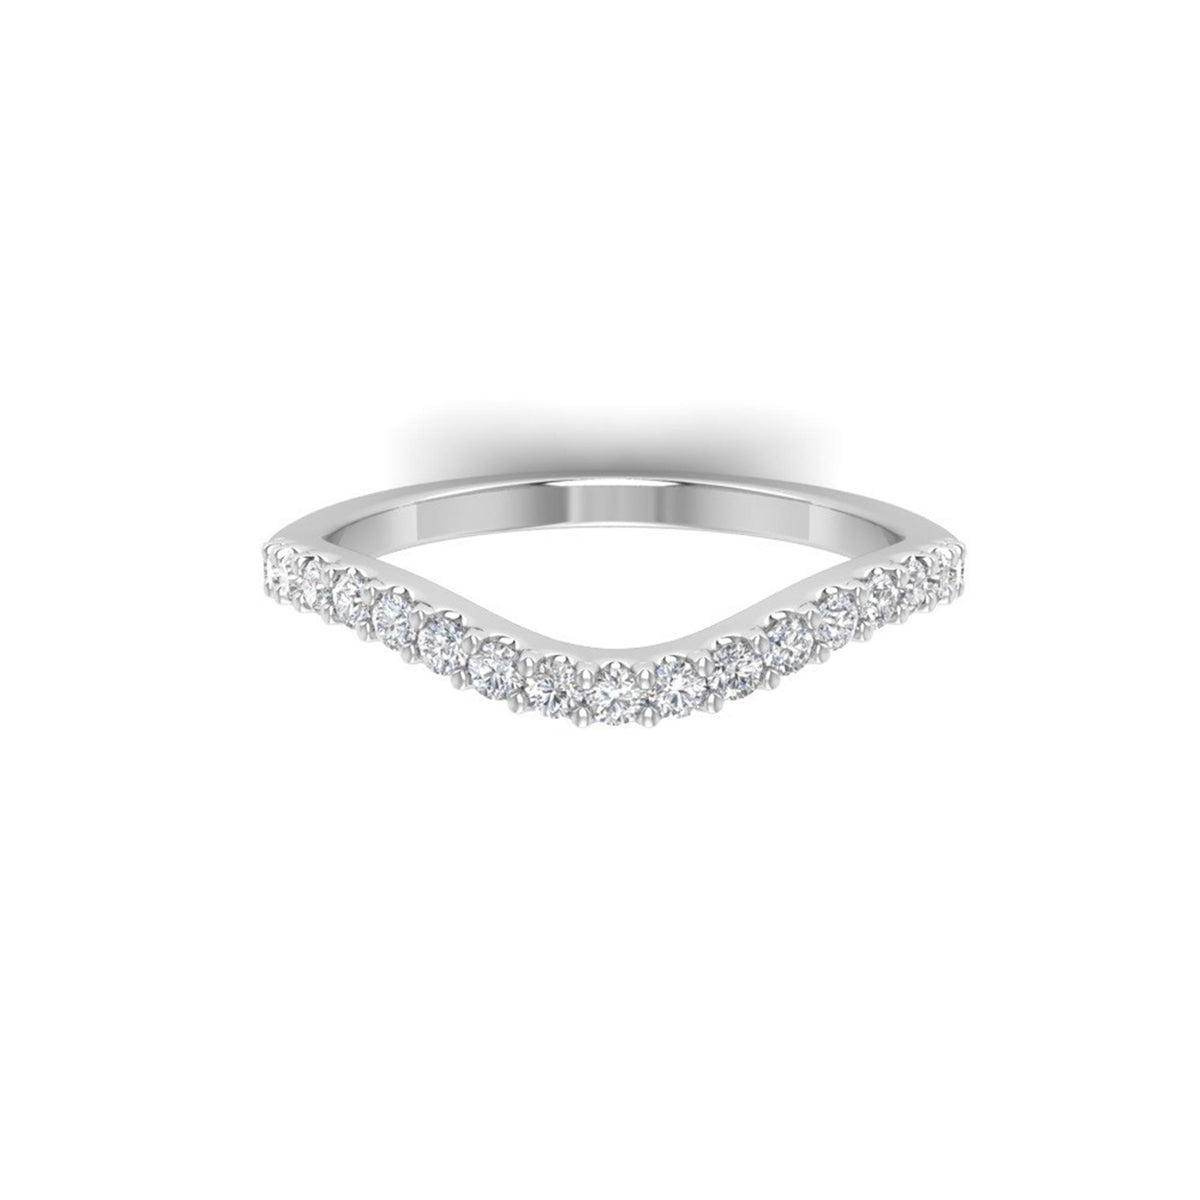 14Kt White Gold Curved Wedding Ring With 0.50cttw Natural Diamonds